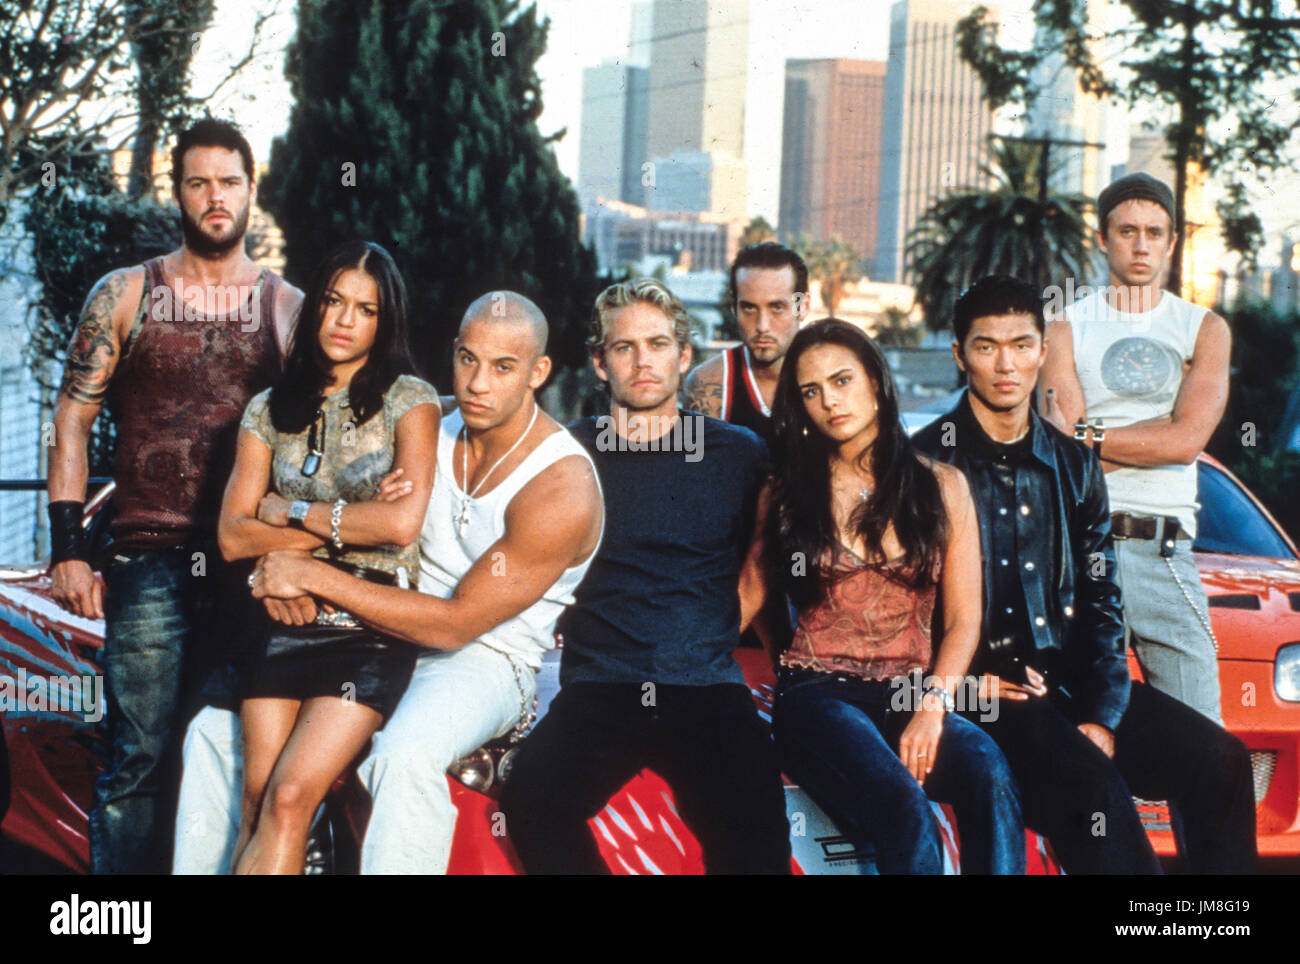 2001 Fast and the furious, gegossen, Stockfoto